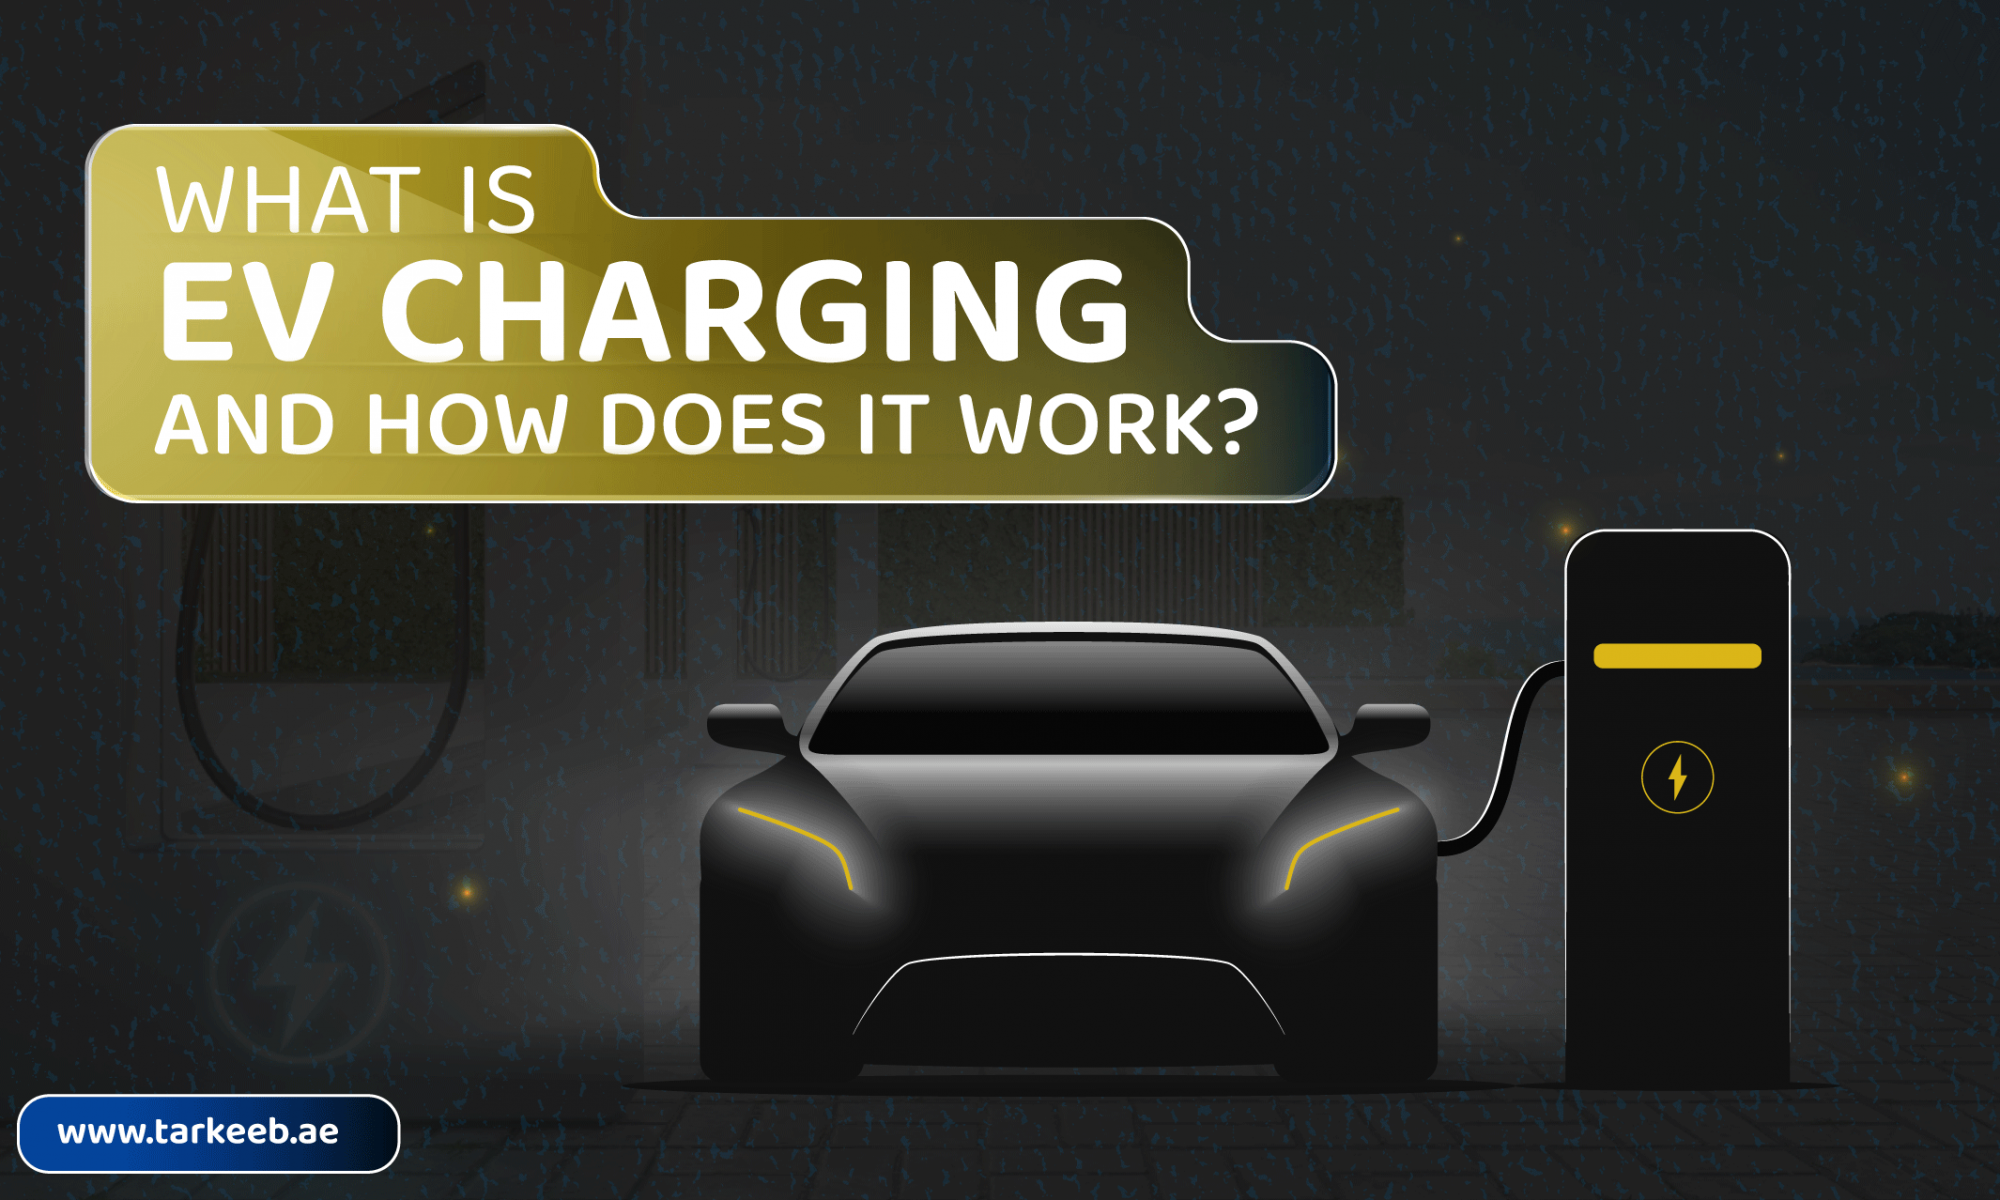 What is EV Charging?